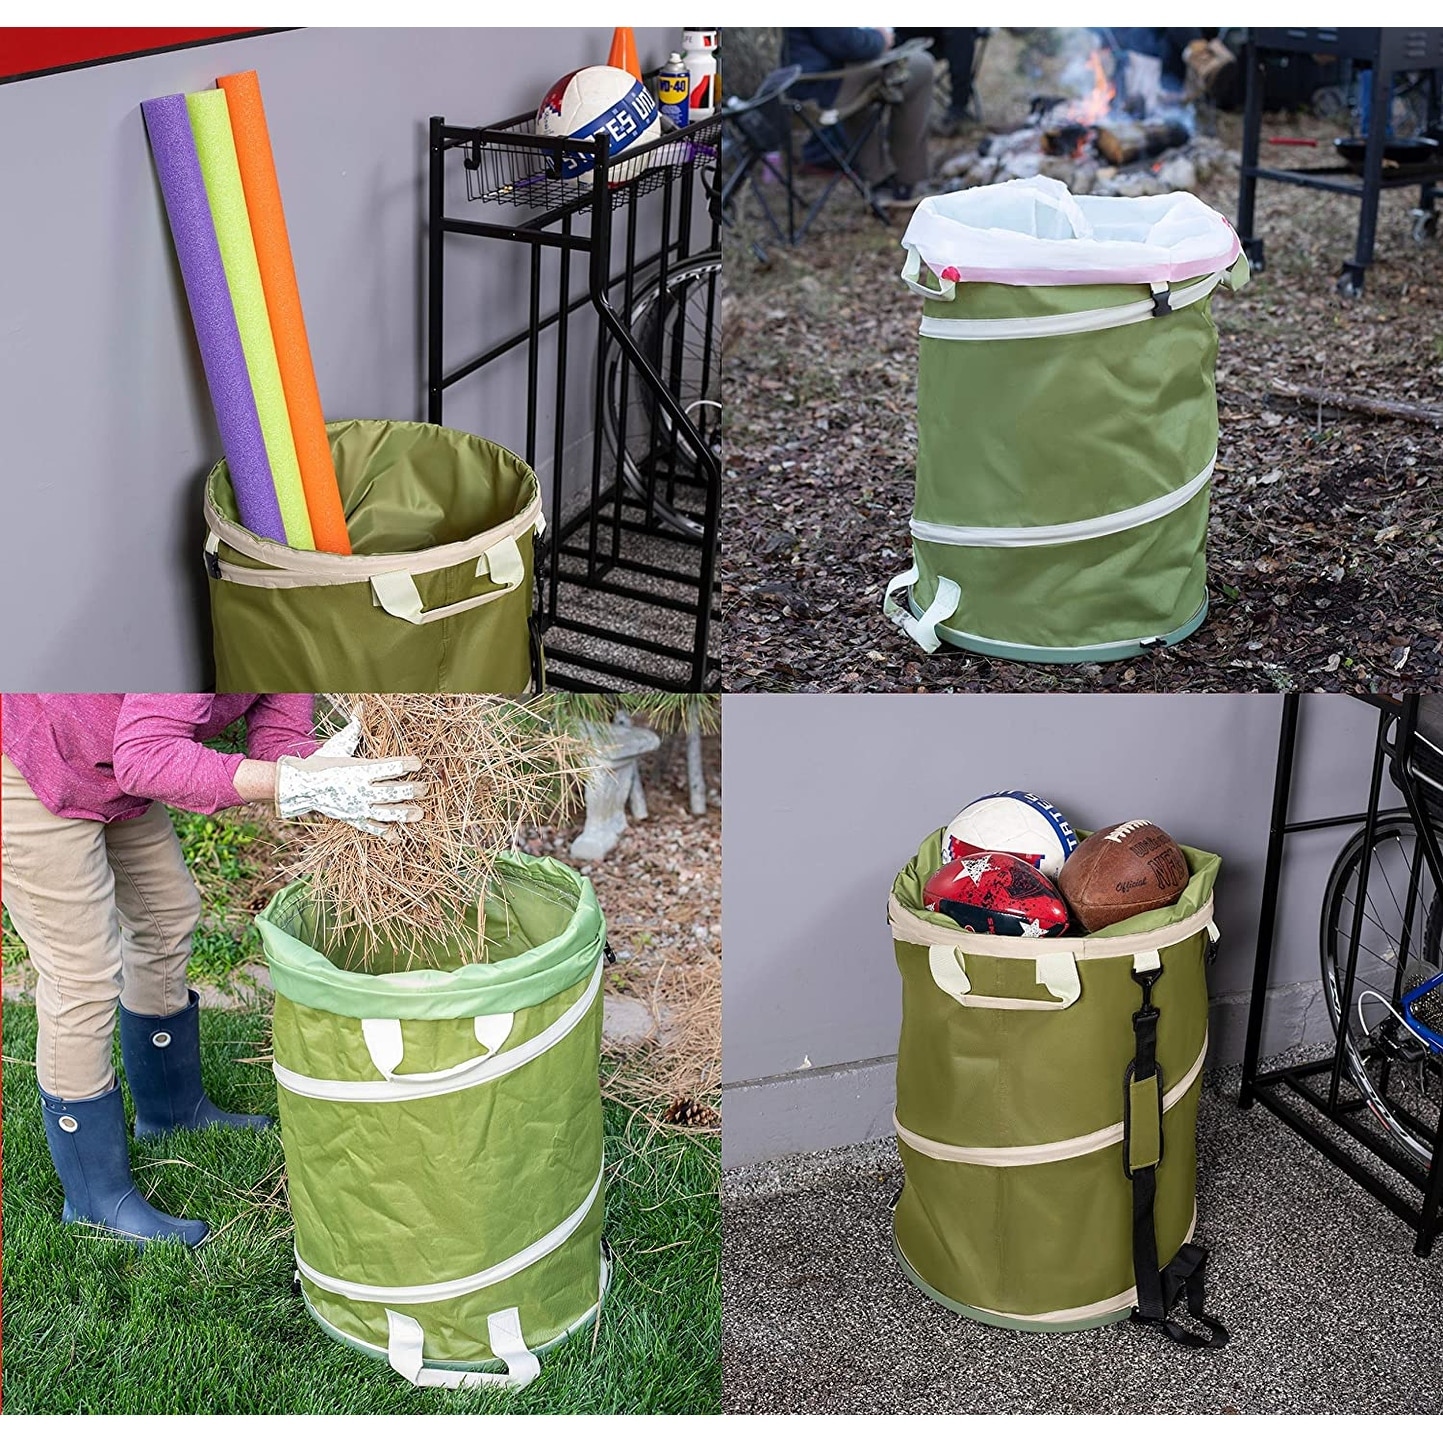 https://ak1.ostkcdn.com/images/products/is/images/direct/7a8a3c2bdba96dd29bea369608a3f0db83cd31d8/BirdRock-Home-30-Gallon-Collapsible-Lawn-and-Leaf-Waste-Bag---Reusable-Camping-Trash-Can.jpg